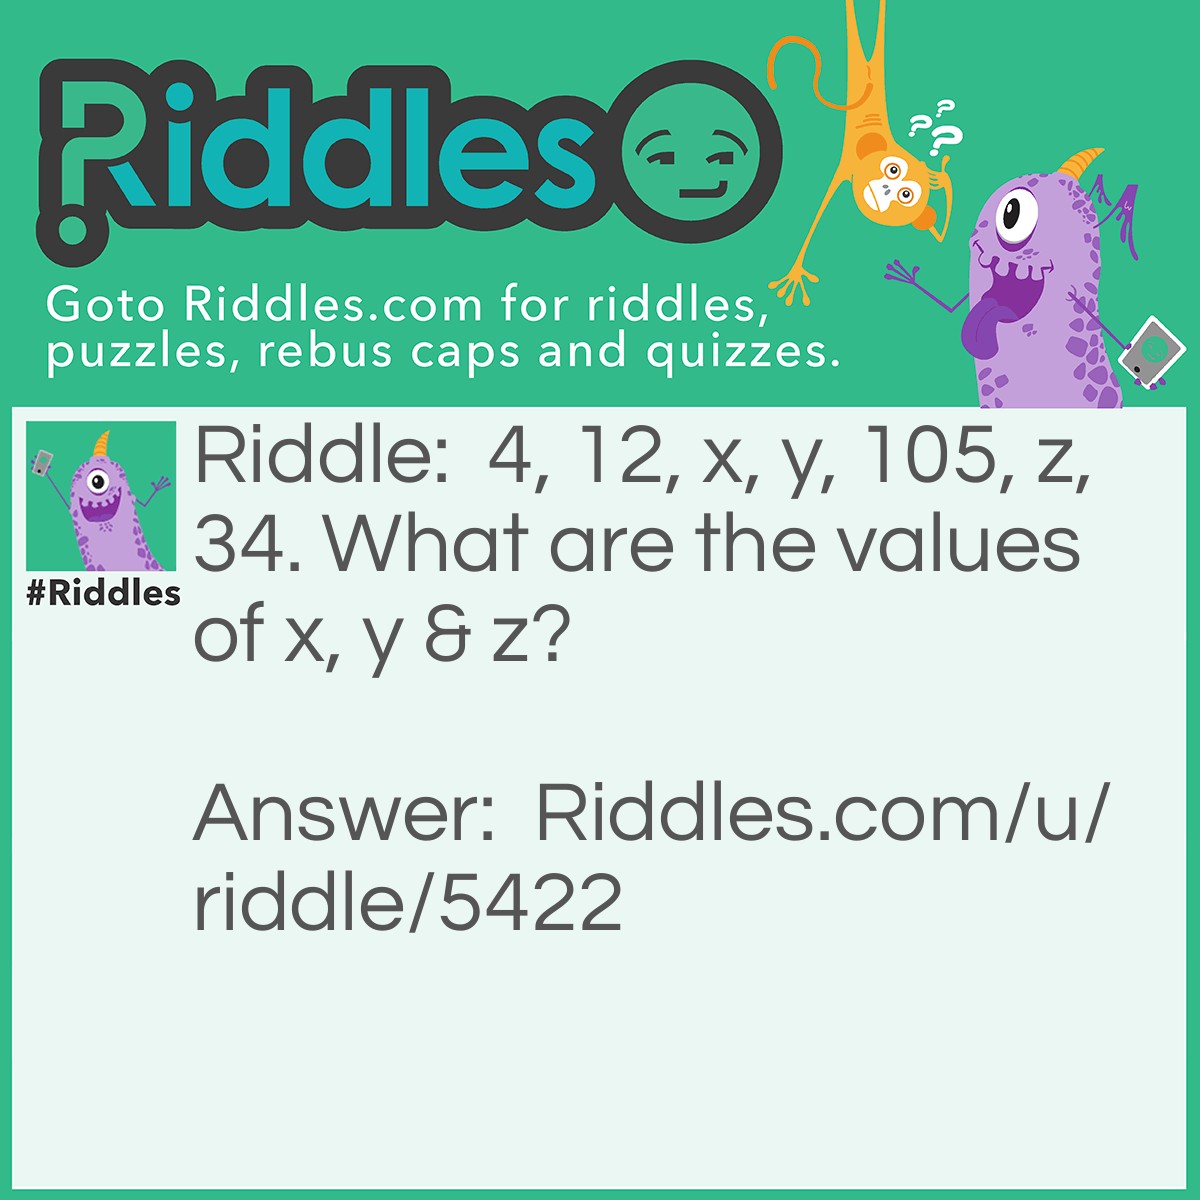 Riddle: 4, 12, x, y, 105, z, 34. What are the values of x, y & z? Answer: x=36, y=108, z=102, To get x & y, multiply the preceding number by 3 to get the next value. But after y, the next numbers decrease by 3, So z=105-3=102, then at z, the numbers are divided by 3.